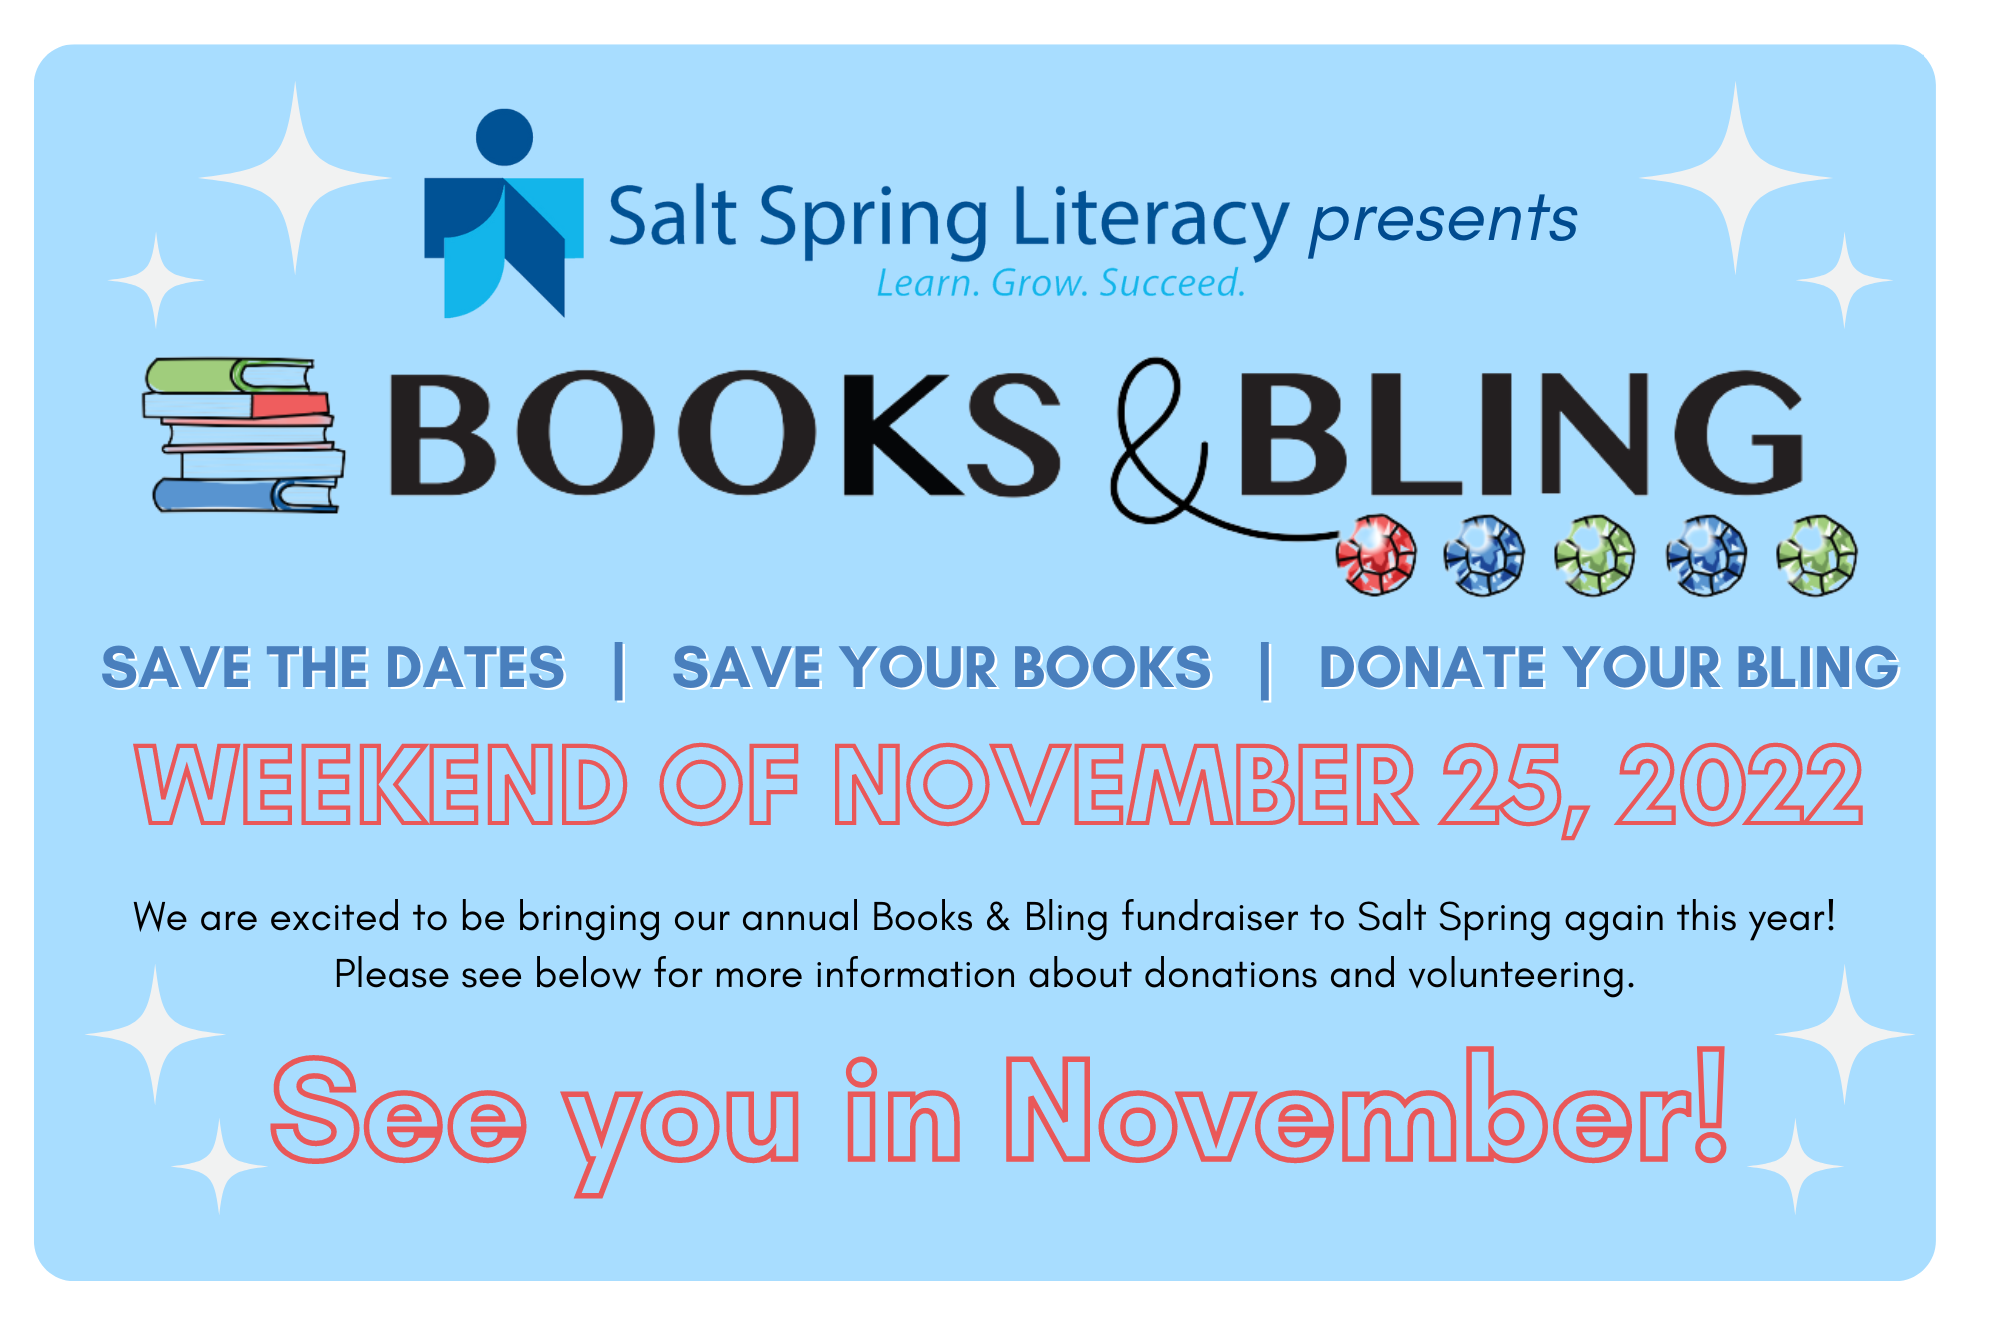 Salt Spring Literacy Presents Books & Bling 2022, Save The Dates, Save Your Books, Donate Your Bling, Event is Weekend of November 25th, 2022